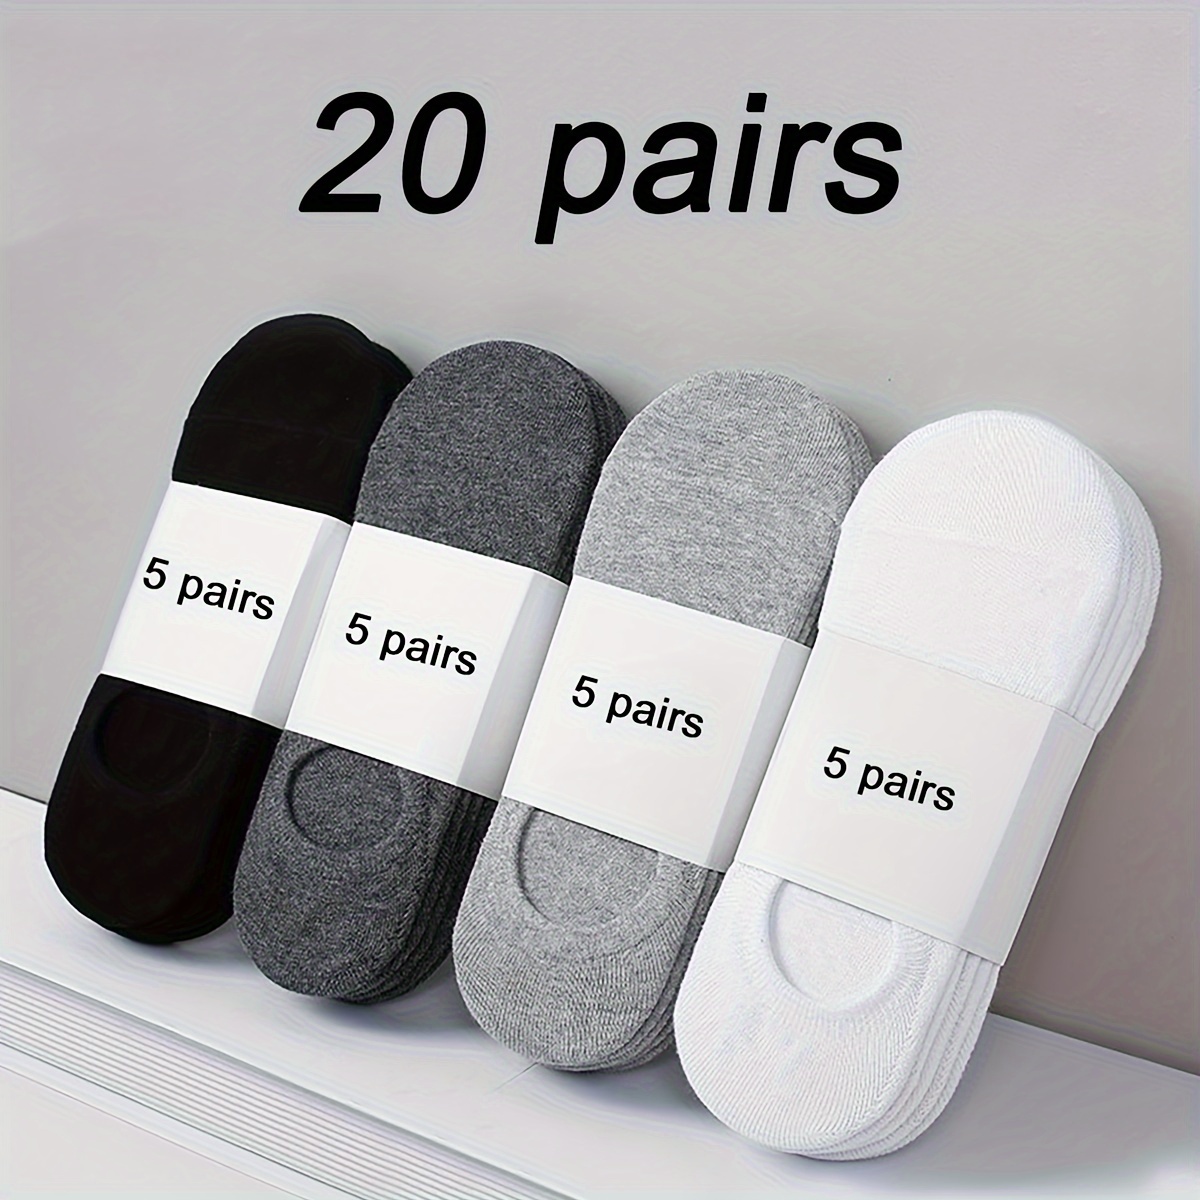 

20 Pairs Of Men's Solid No-show Socks, Anti Odor & Sweat Absorption Breathable Socks, For All Seasons Wearing